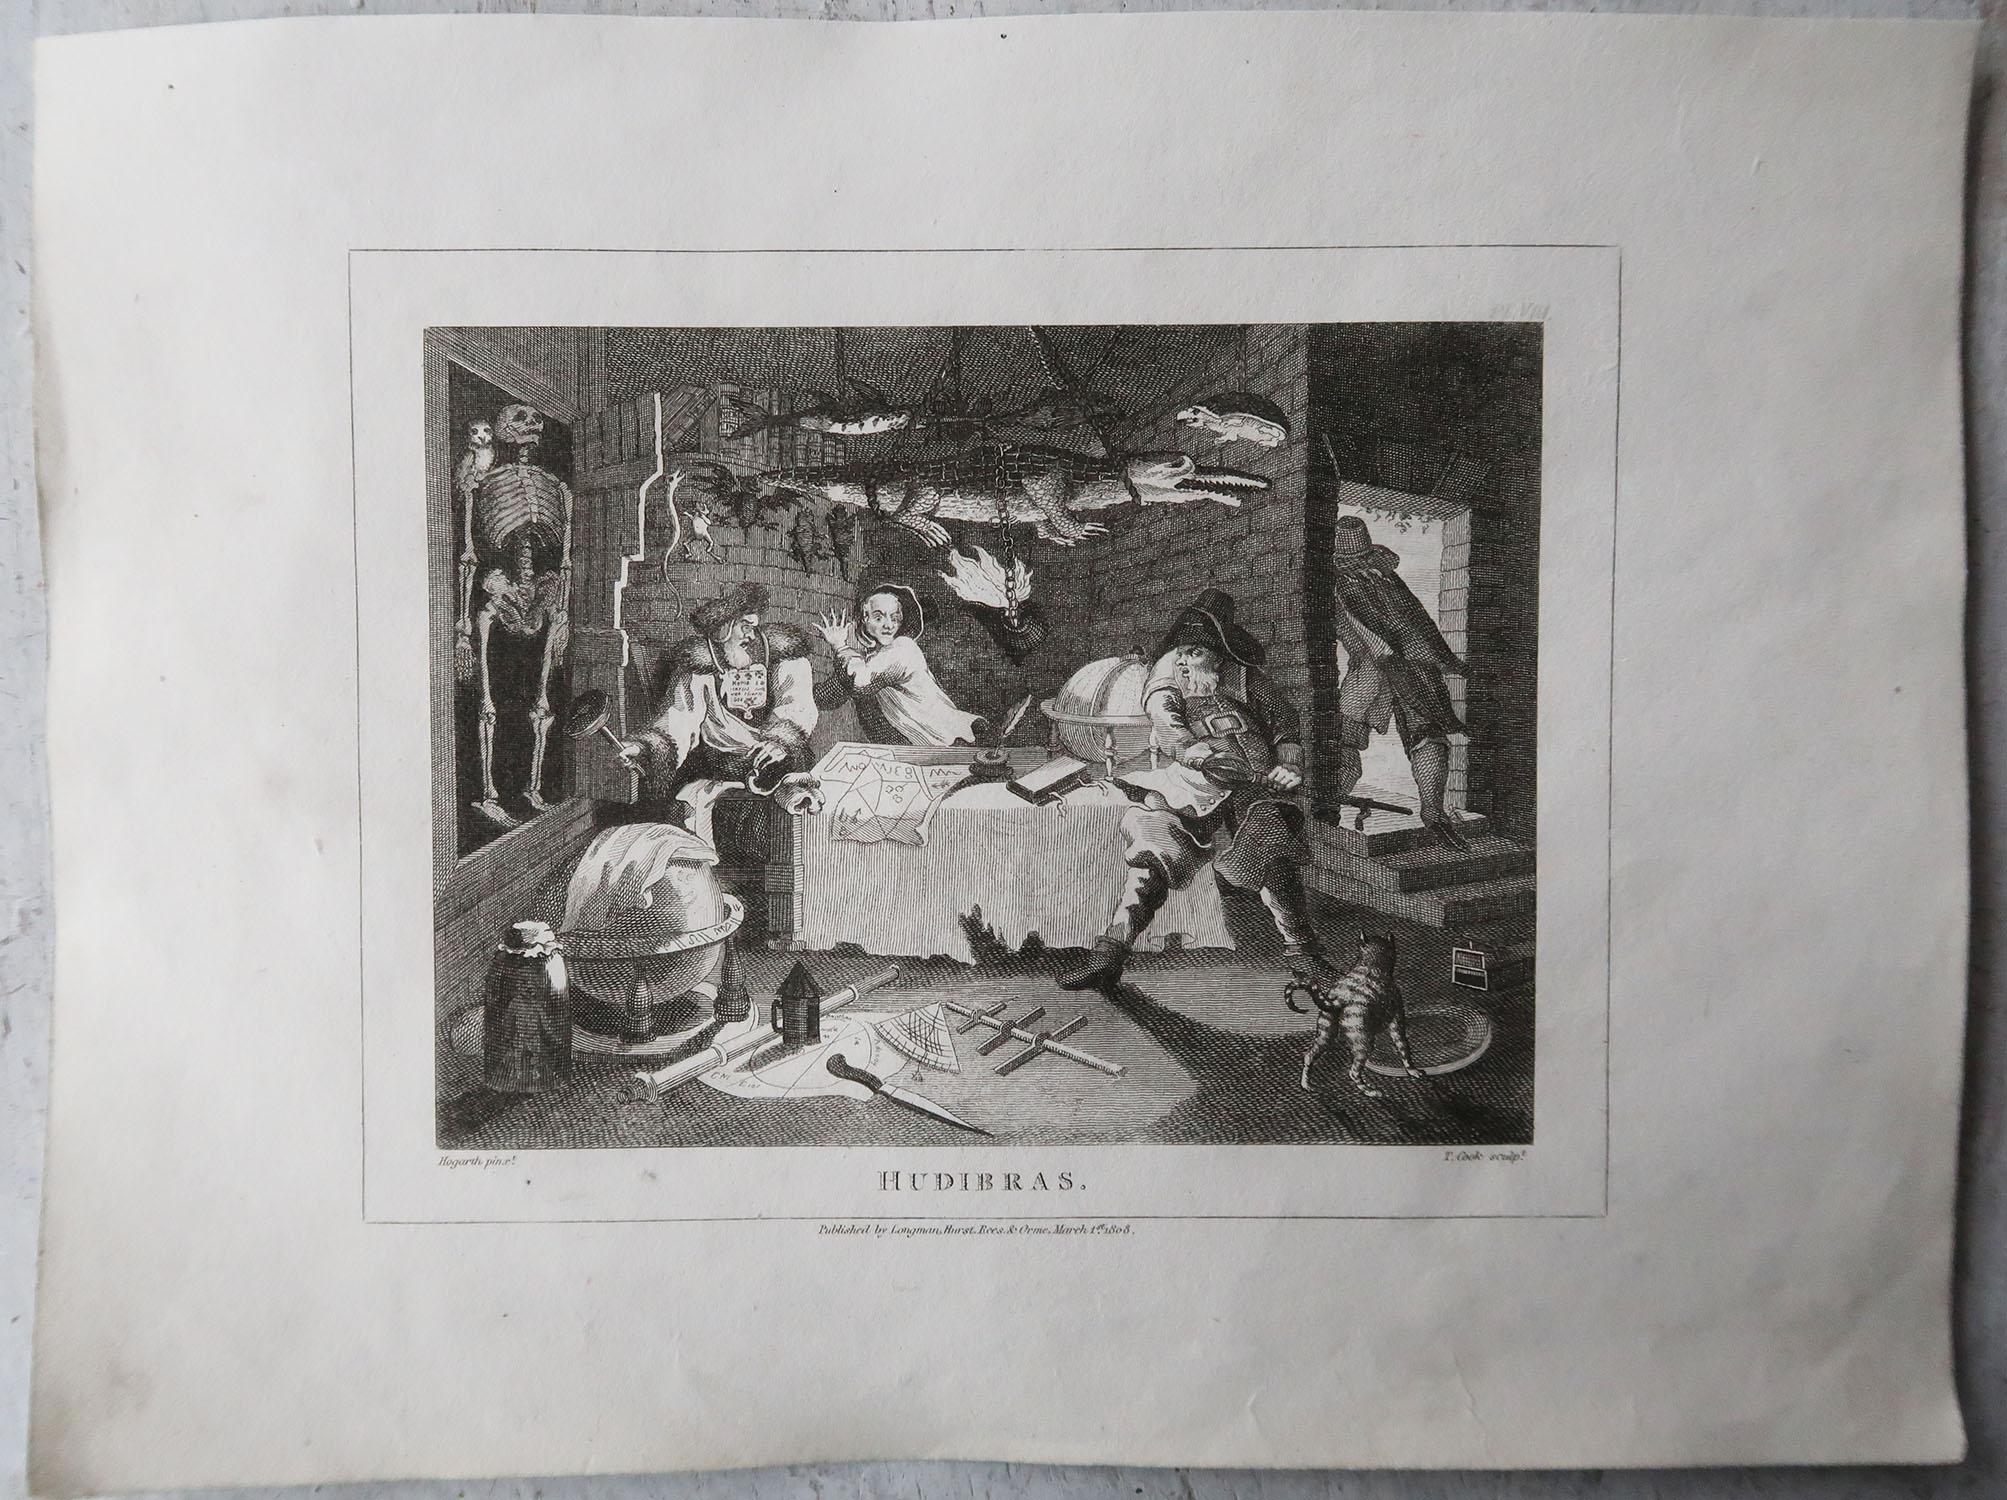 Wonderful set of 10 Hogarth prints

This is the Hubidras series typical of the satirical/political artwork of Hogarth

Copper-plate engravings by Thomas Cook

Published by Longman, Hirst, Rees & Orme, 1807-1808

Unframed and not